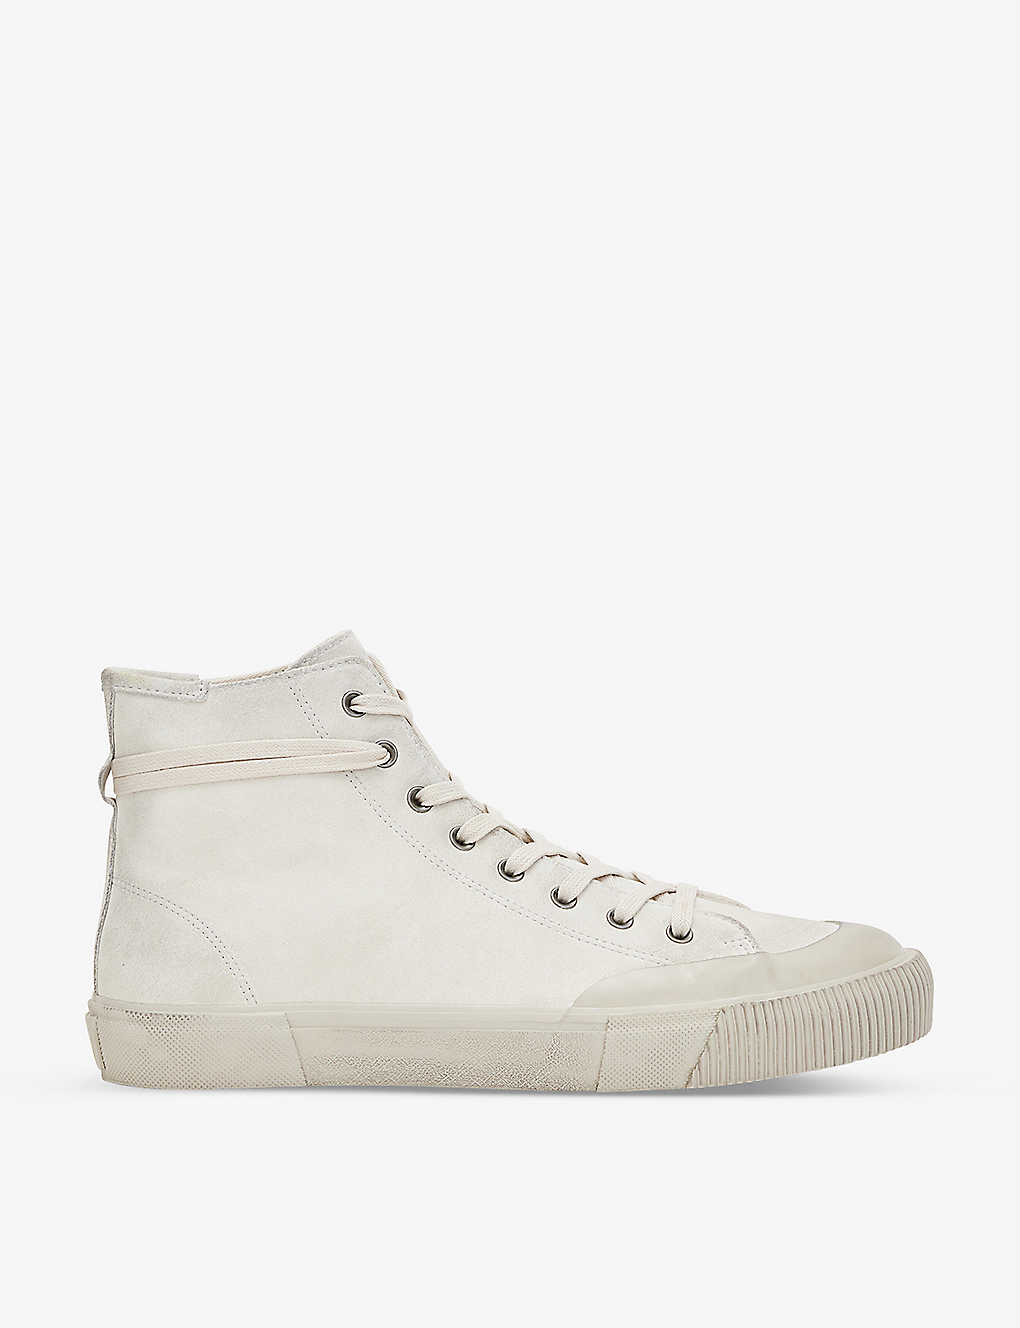 Allsaints Dumont Brand-patch Suede Hi-tops In Chalk White